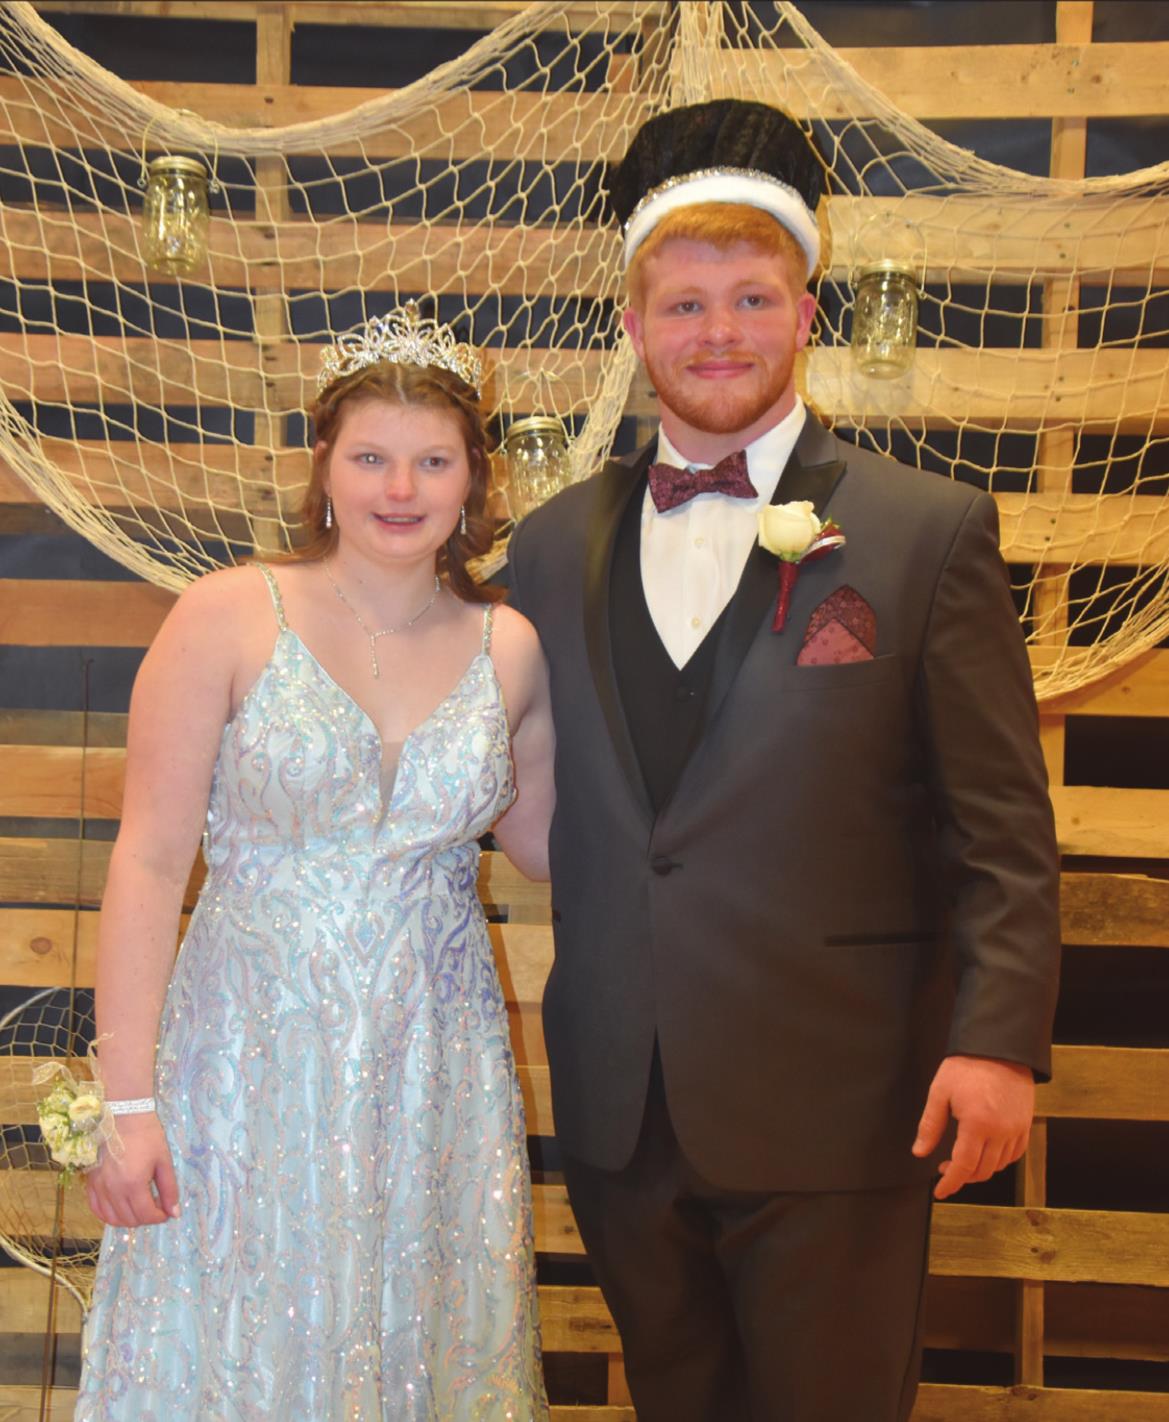 AHS Prom Queen & King | The Valley Voice